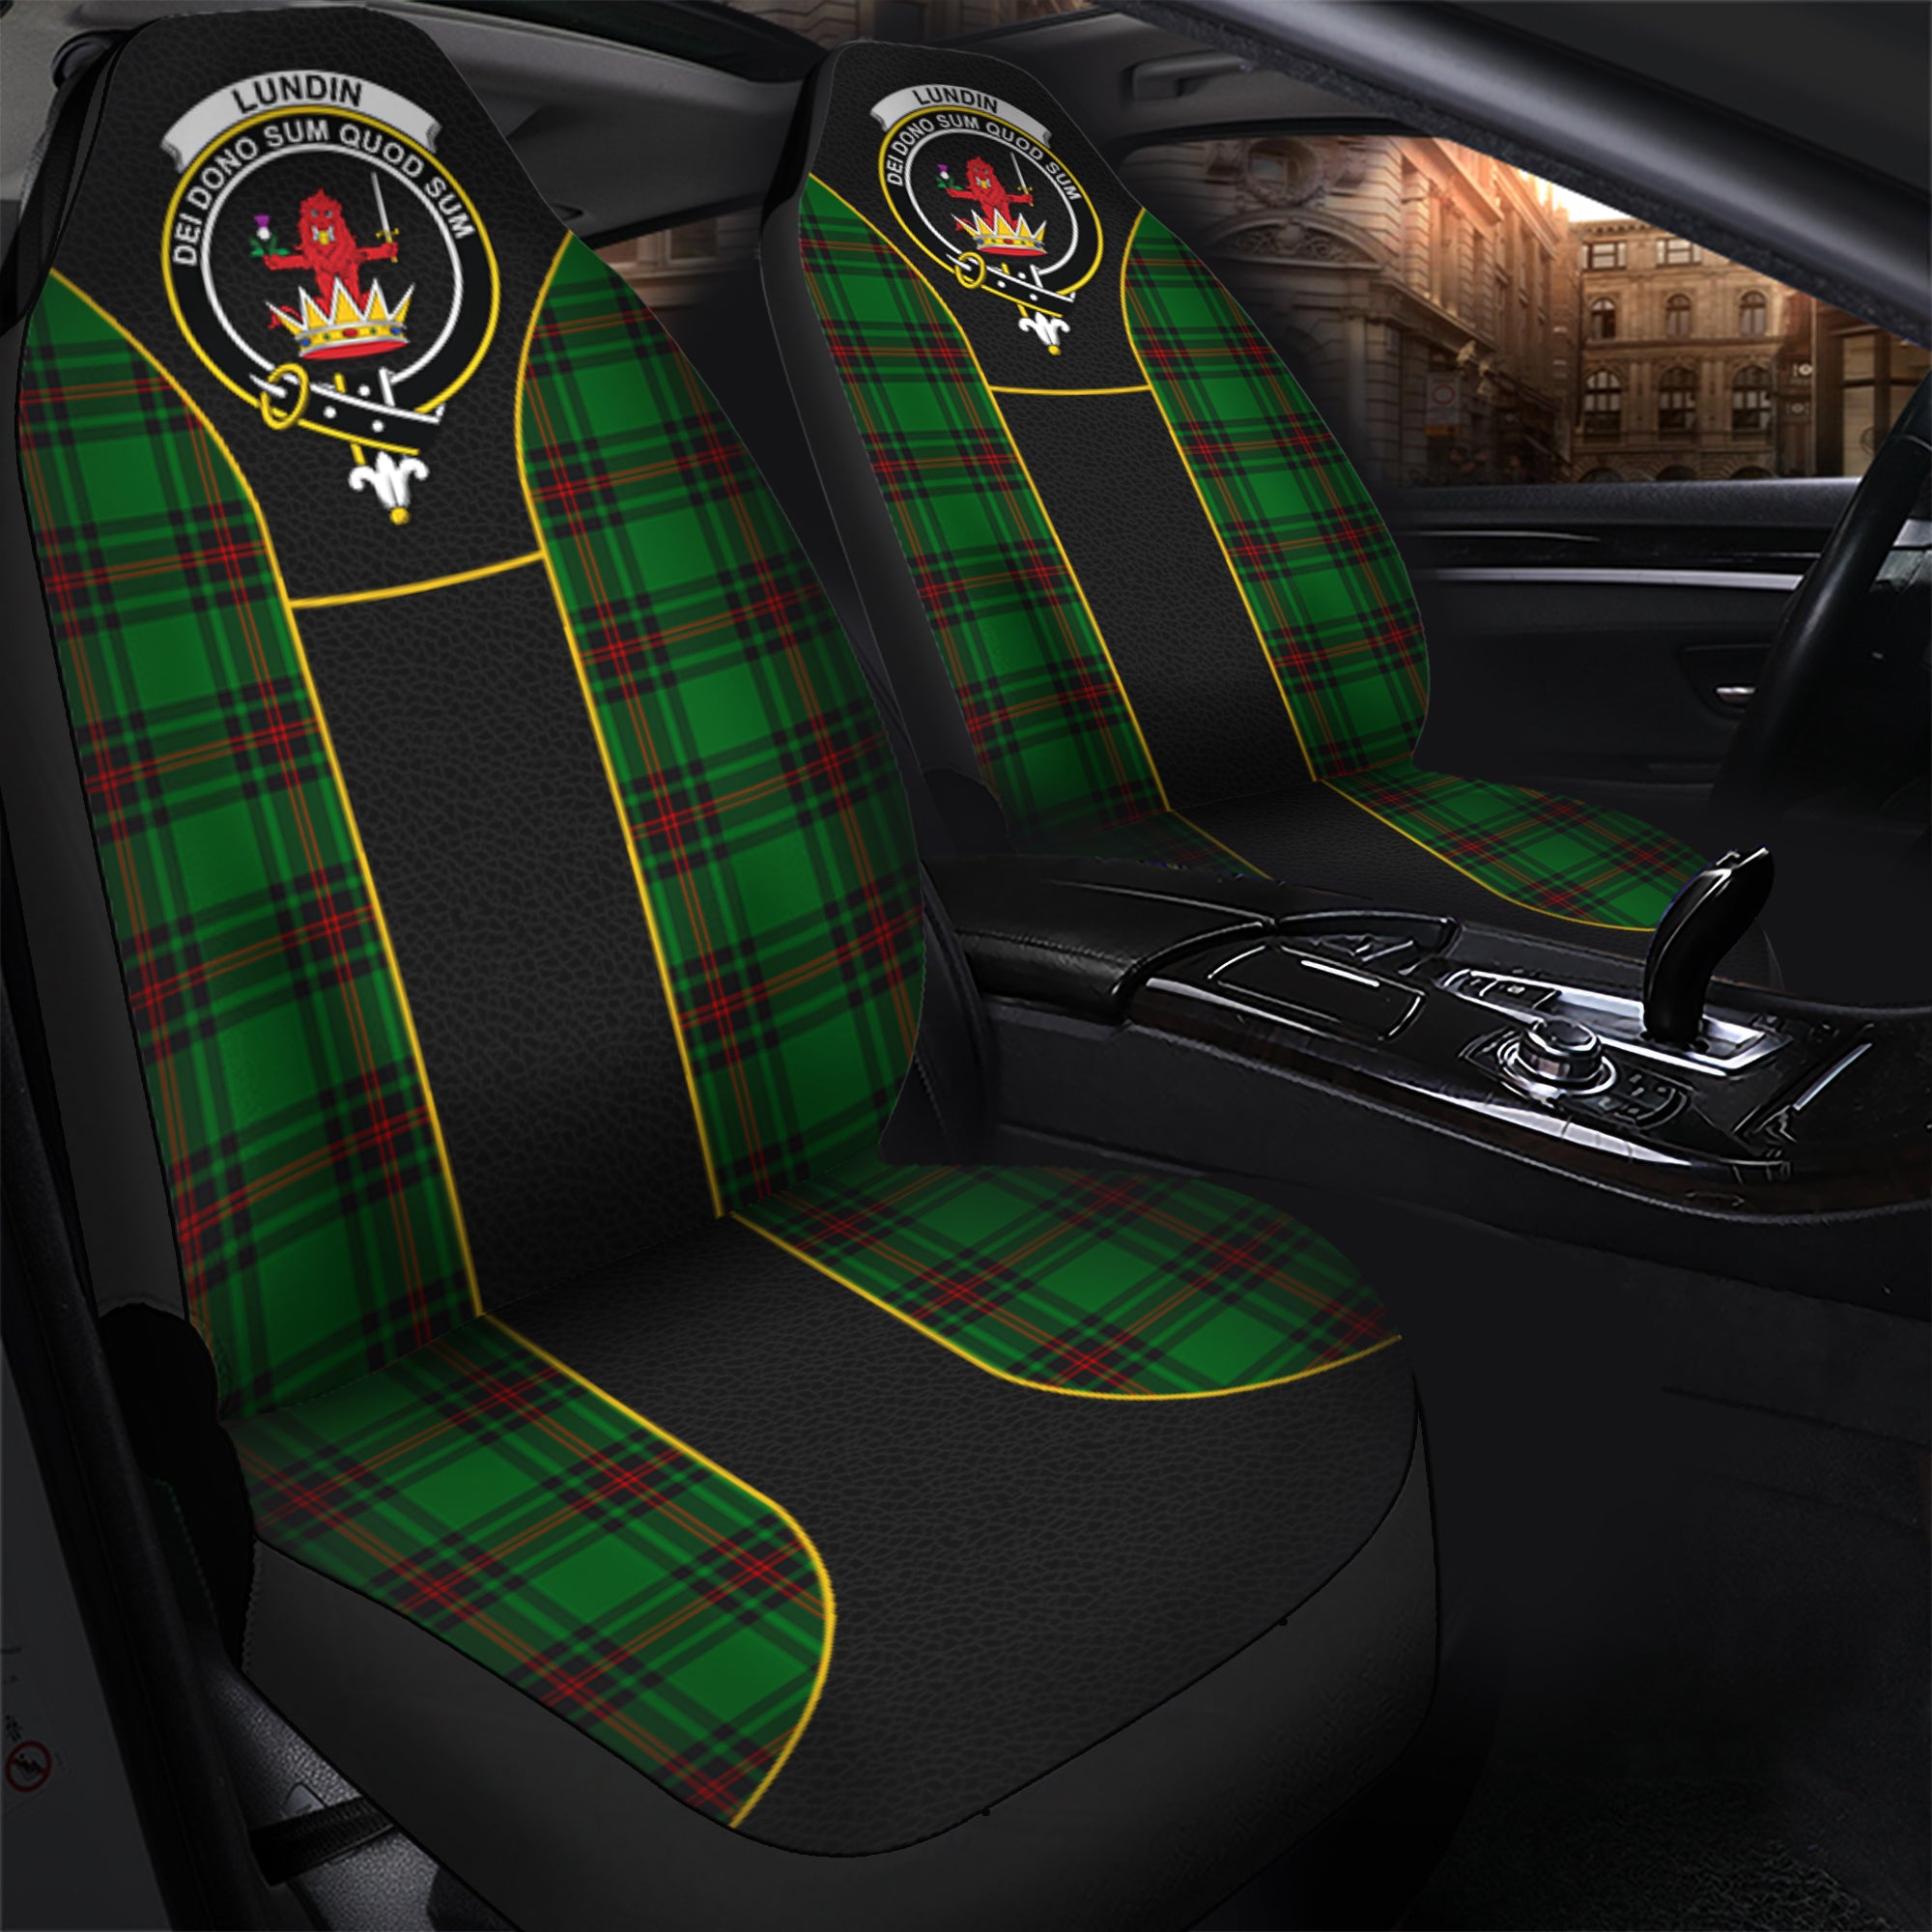 scottish-lundin-tartan-crest-car-seat-cover-special-style